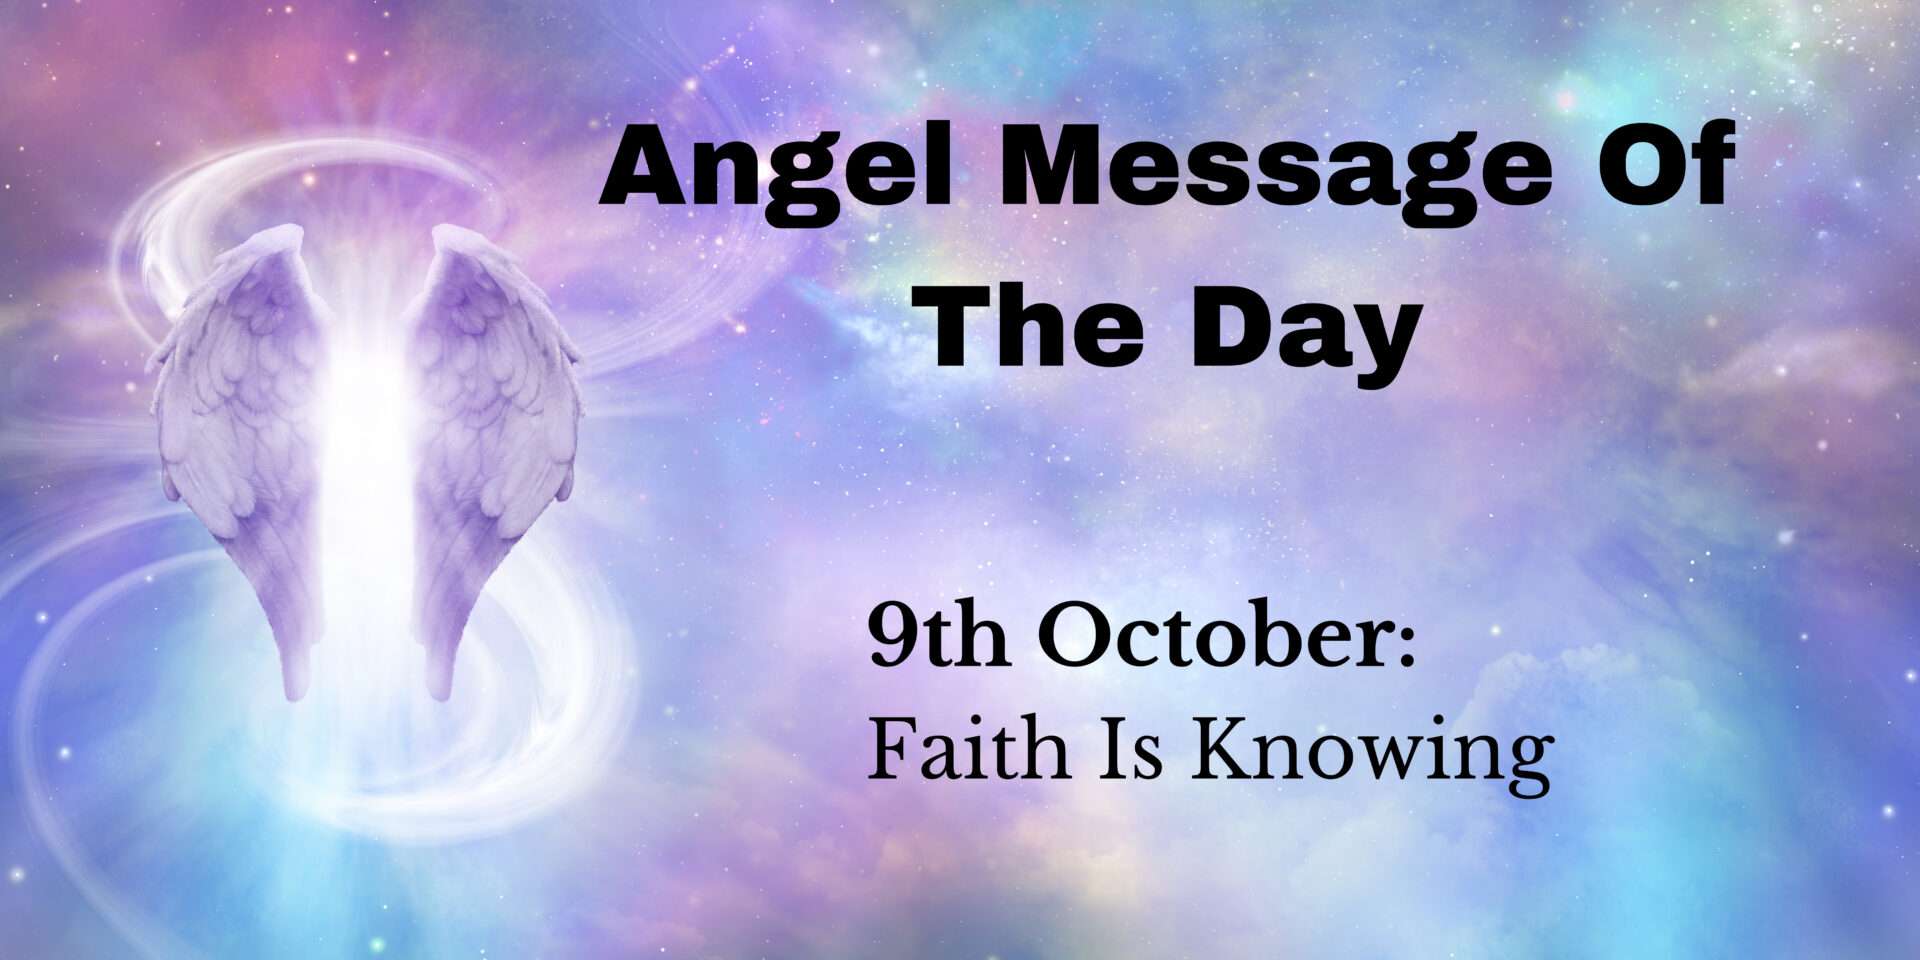 angel message of the day : faith is knowing